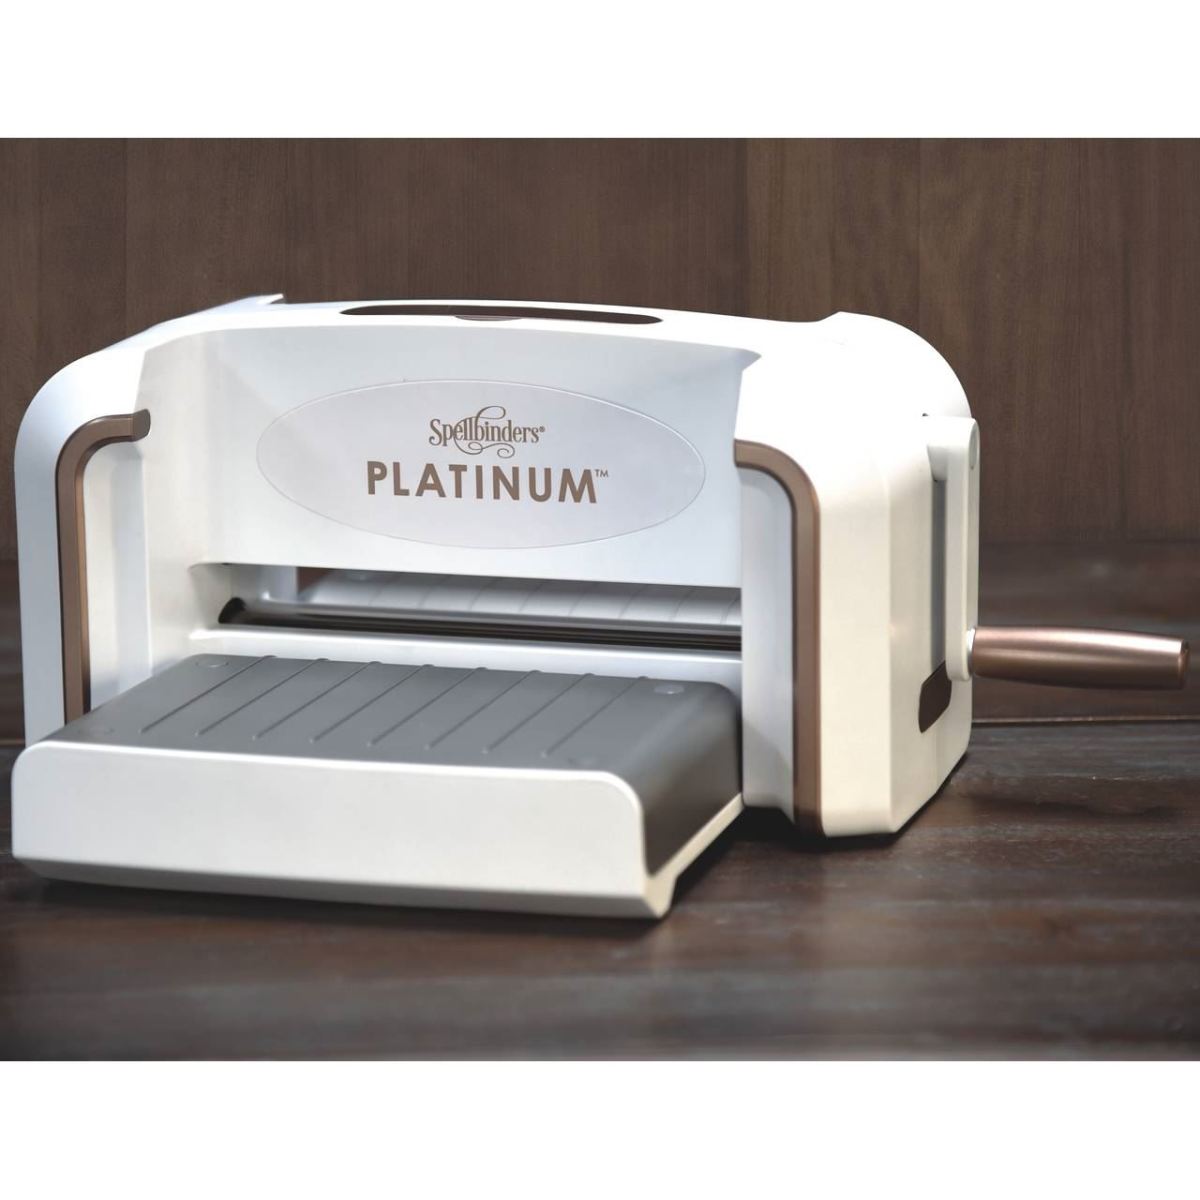 The Spellbinders Platinum die cutting machine is one of many that is compatible with the Glimmer foiling system